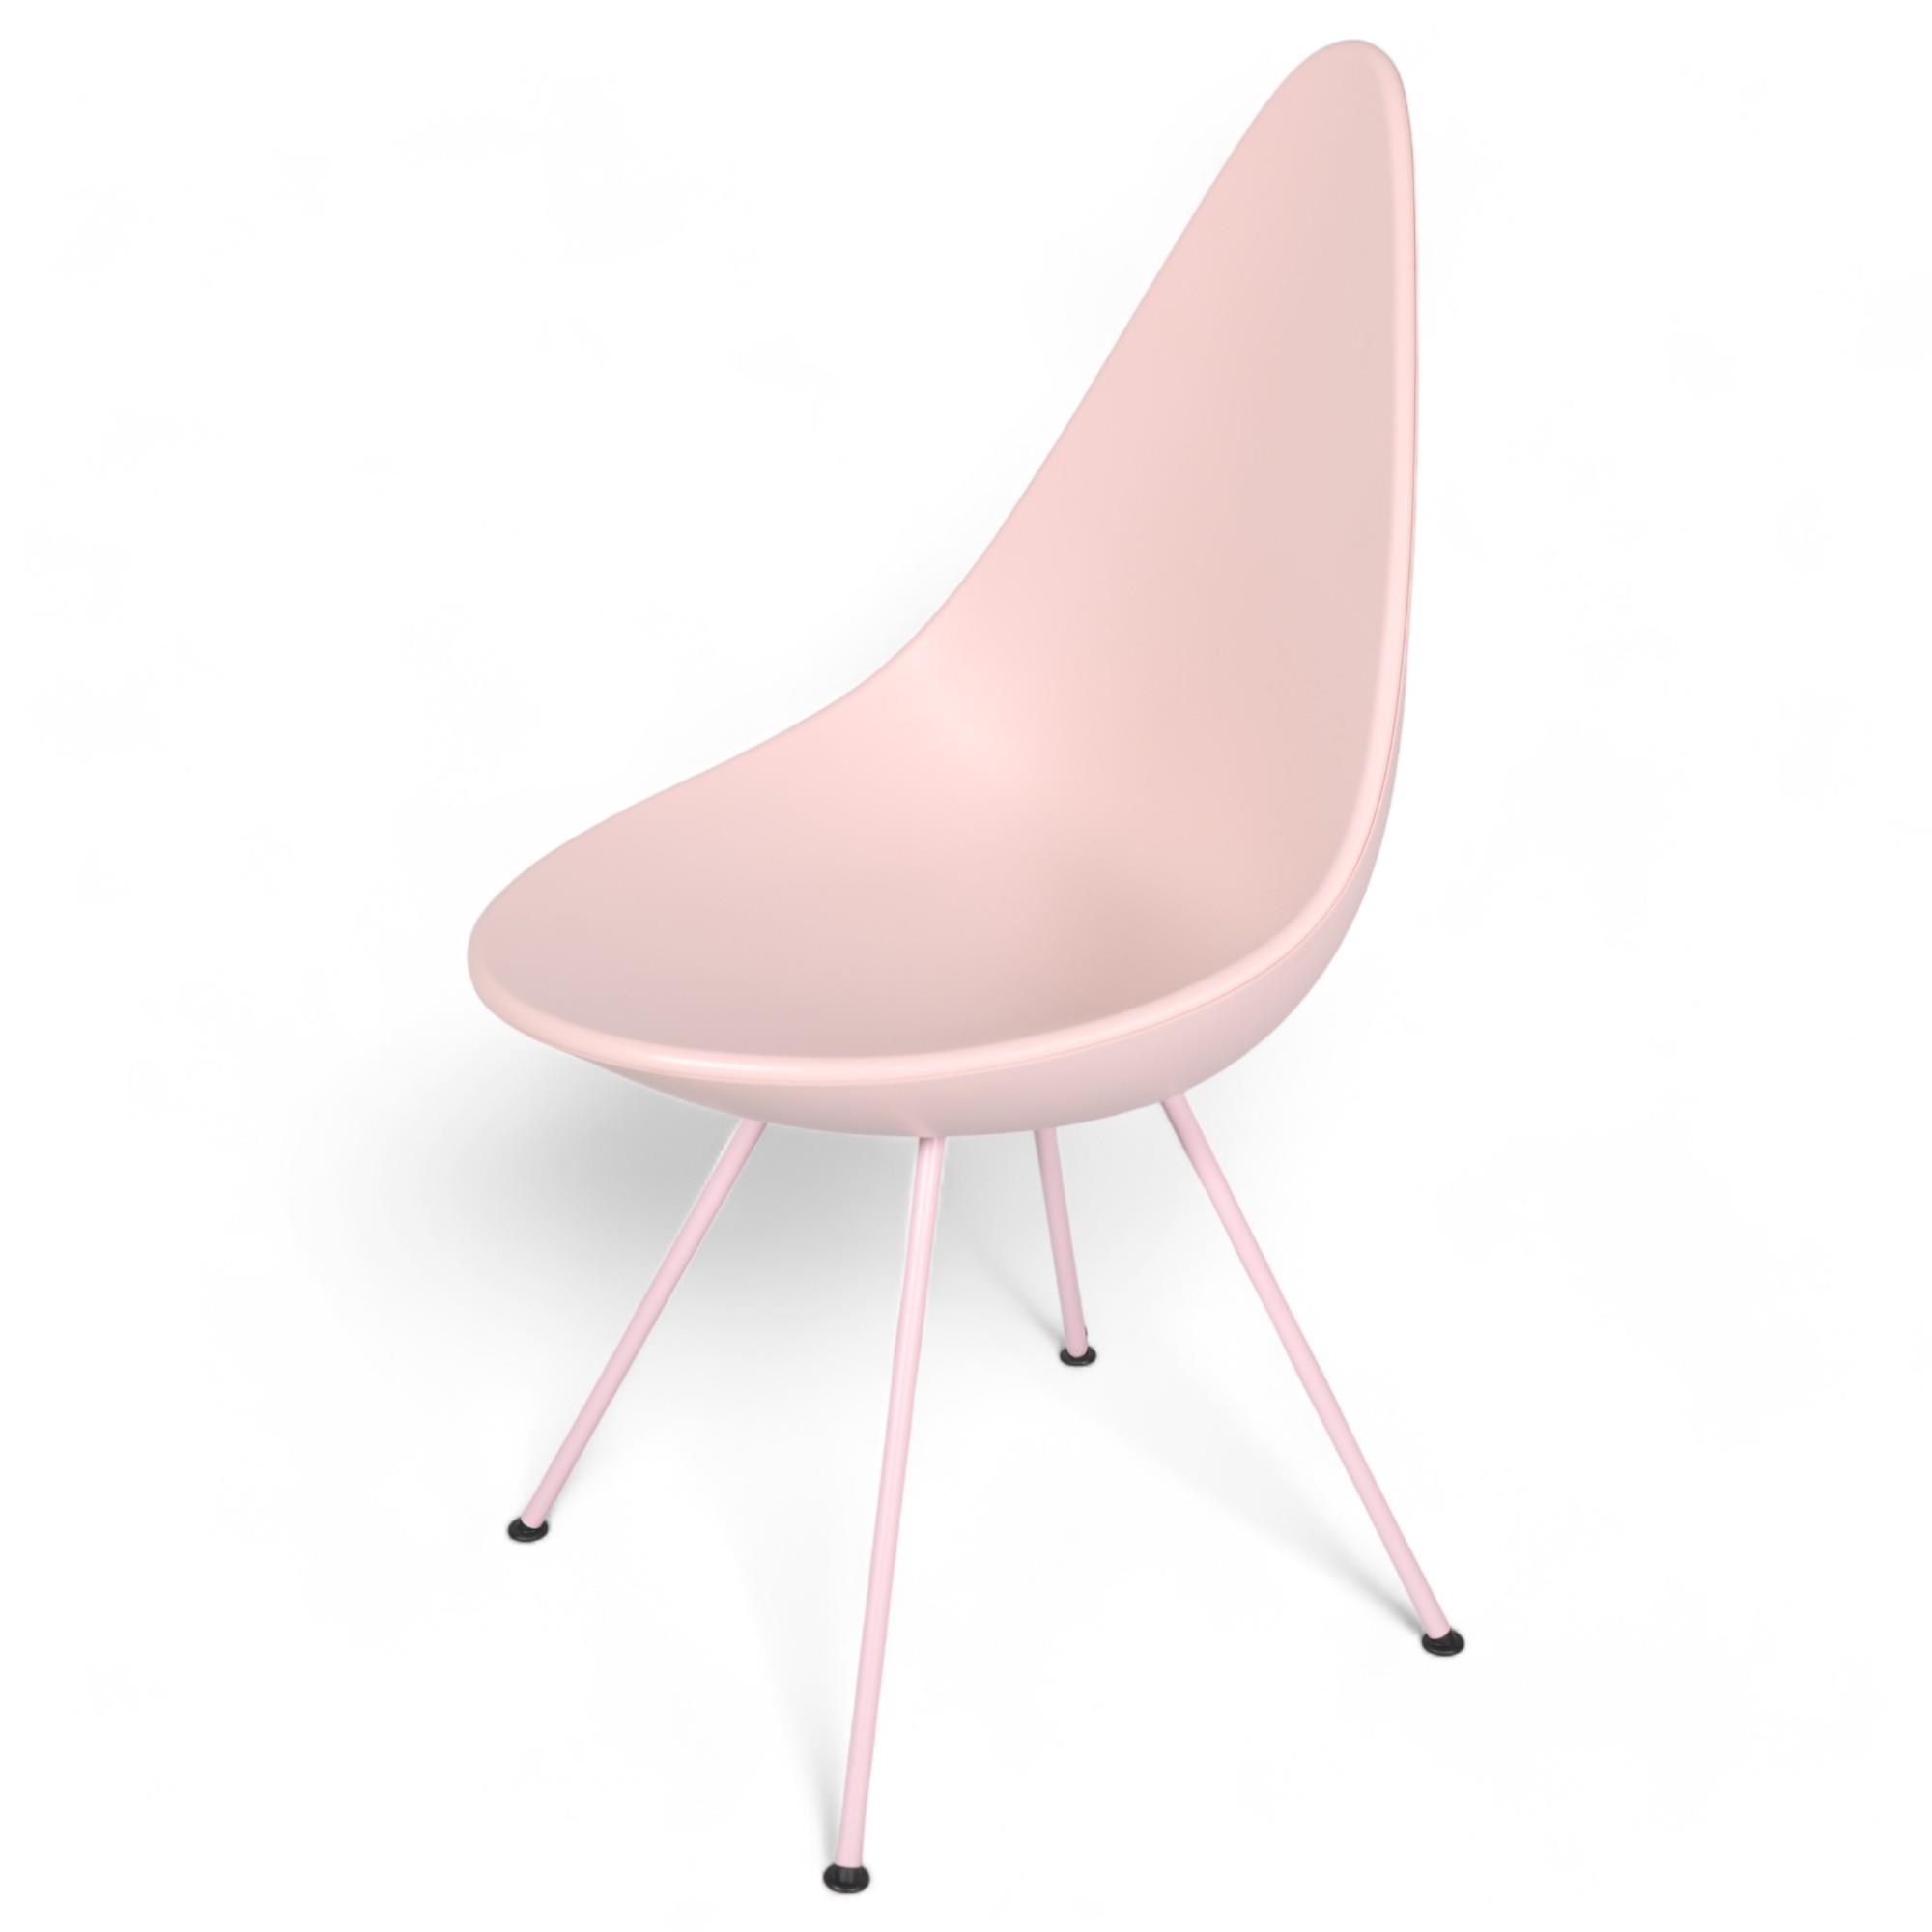 ARNE JACOBSEN - a Fritz Hansen Drop chair , the pink moulded seat on pink enamelled legs, designed